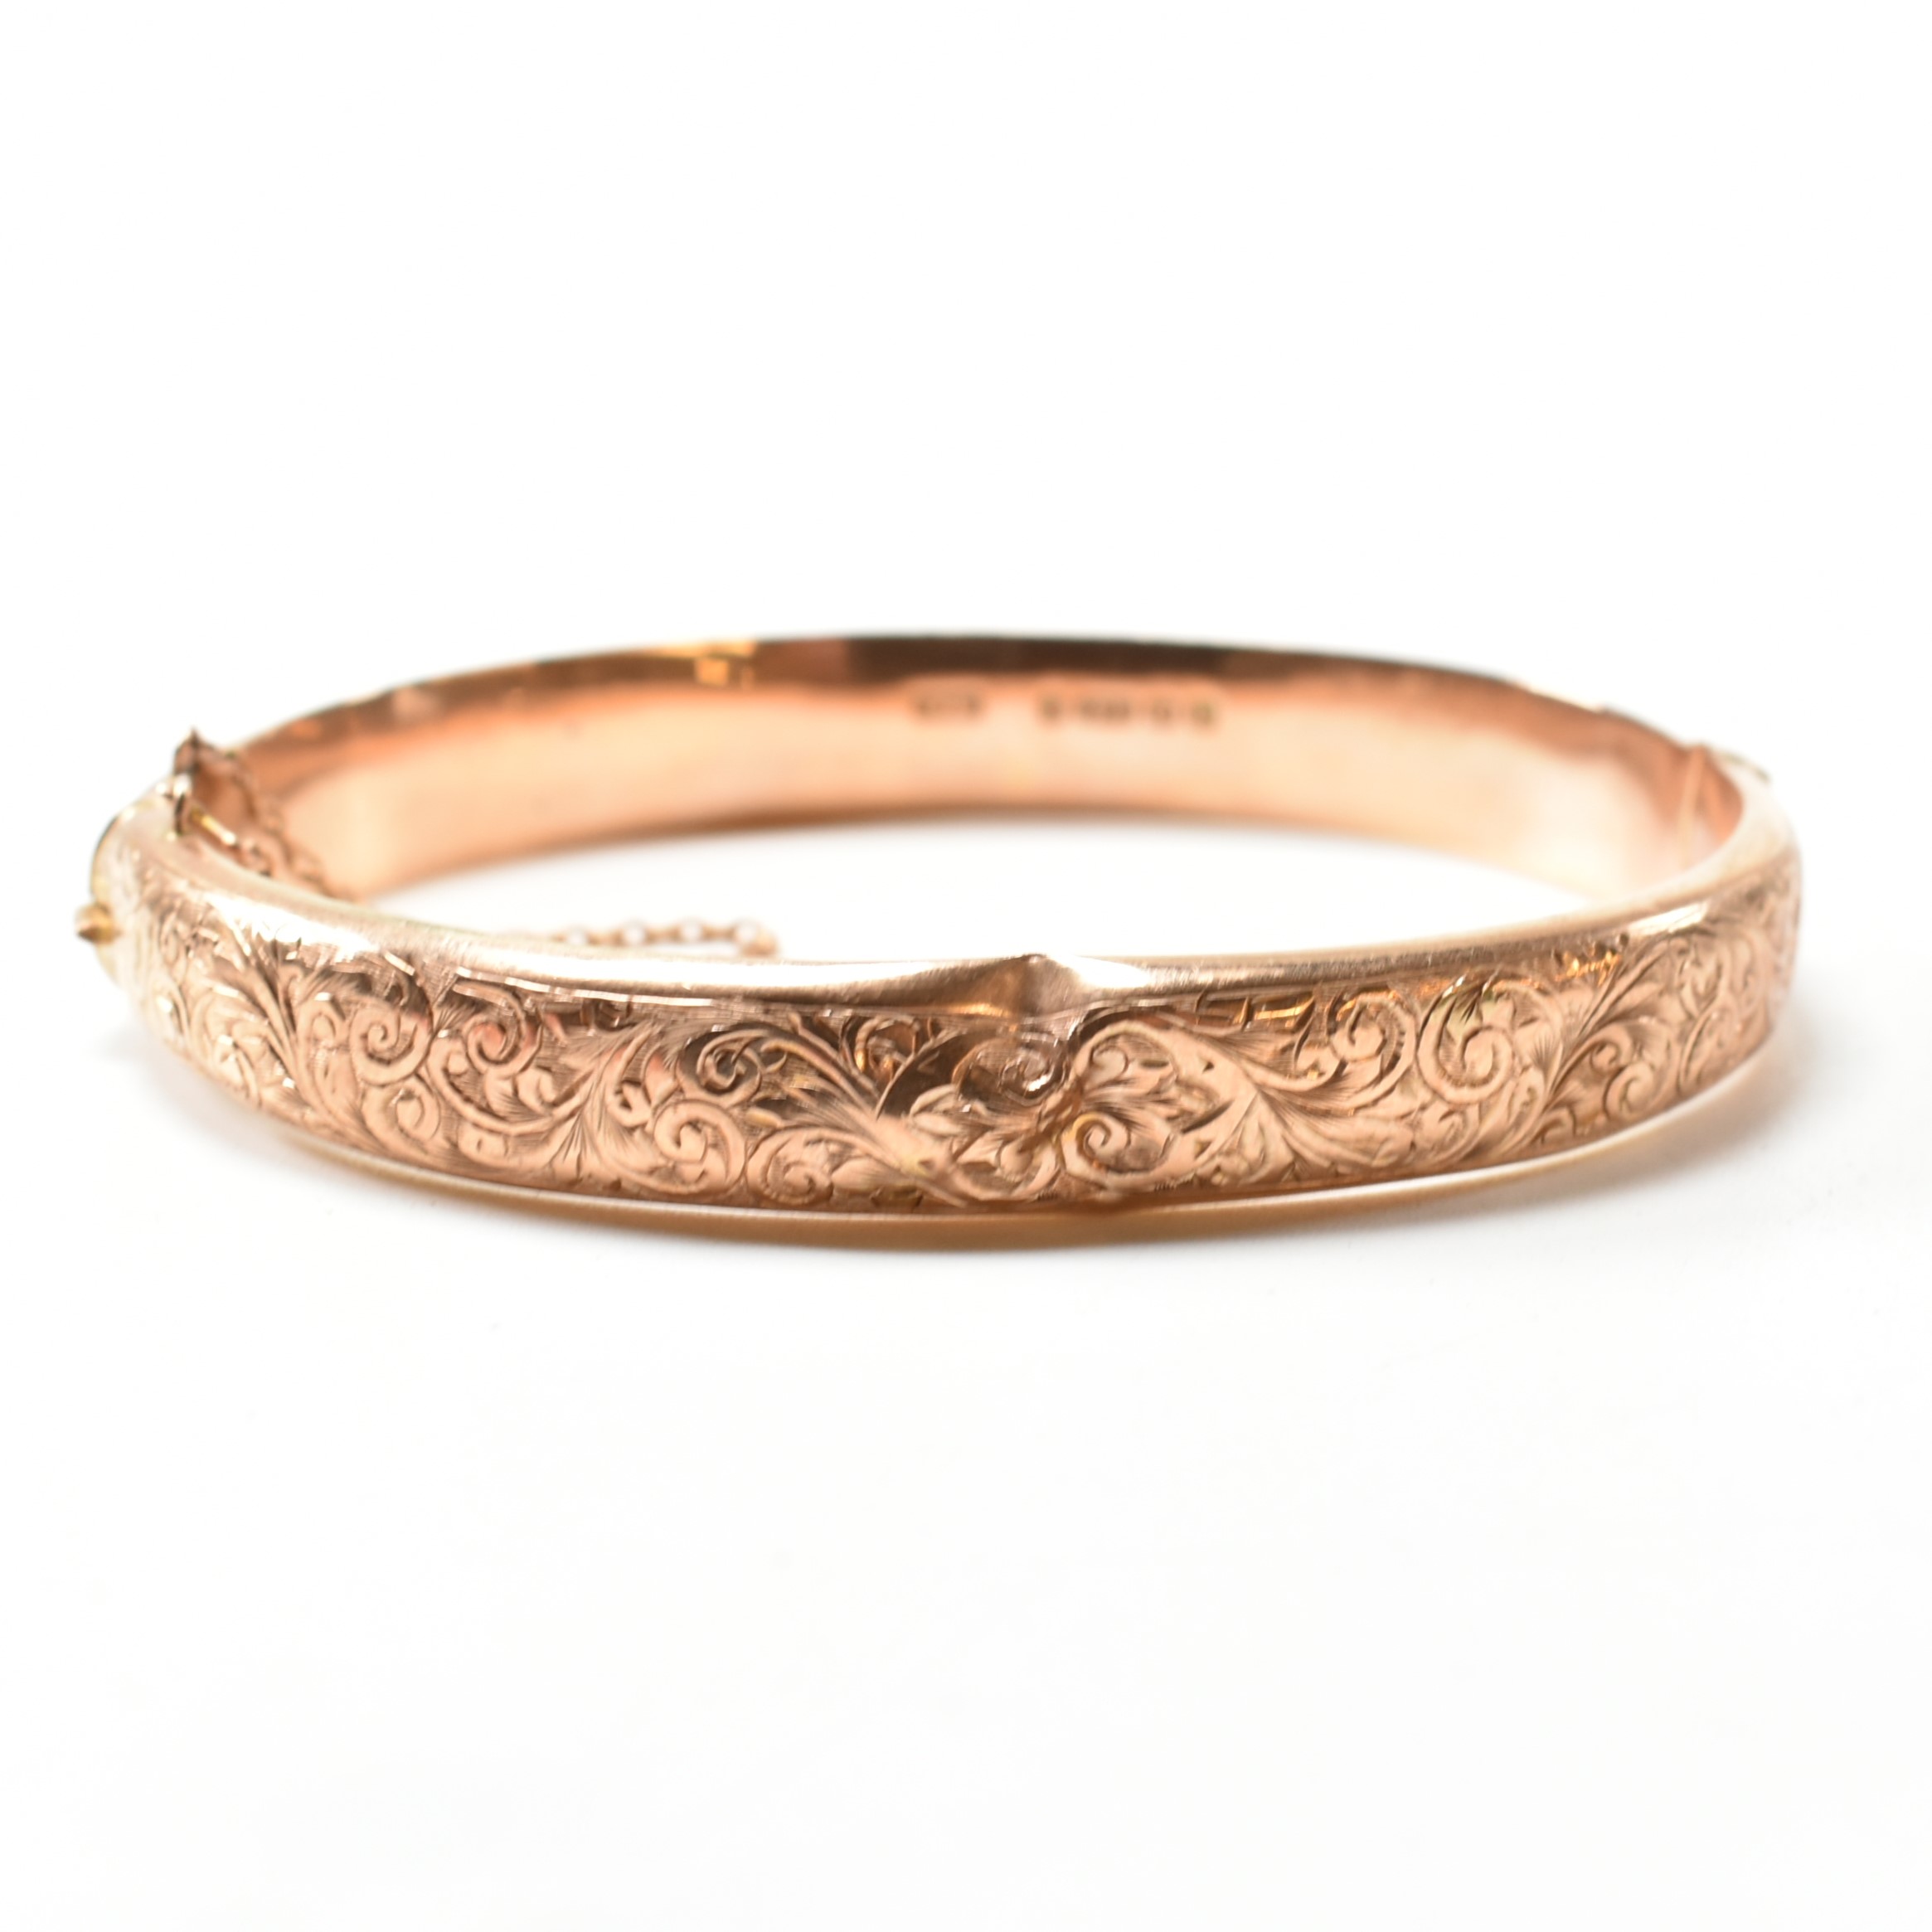 EARLY 20TH CENTURY HALLMARKED 9CT ROSE GOLD ENGRAVED HINGED BANGLE